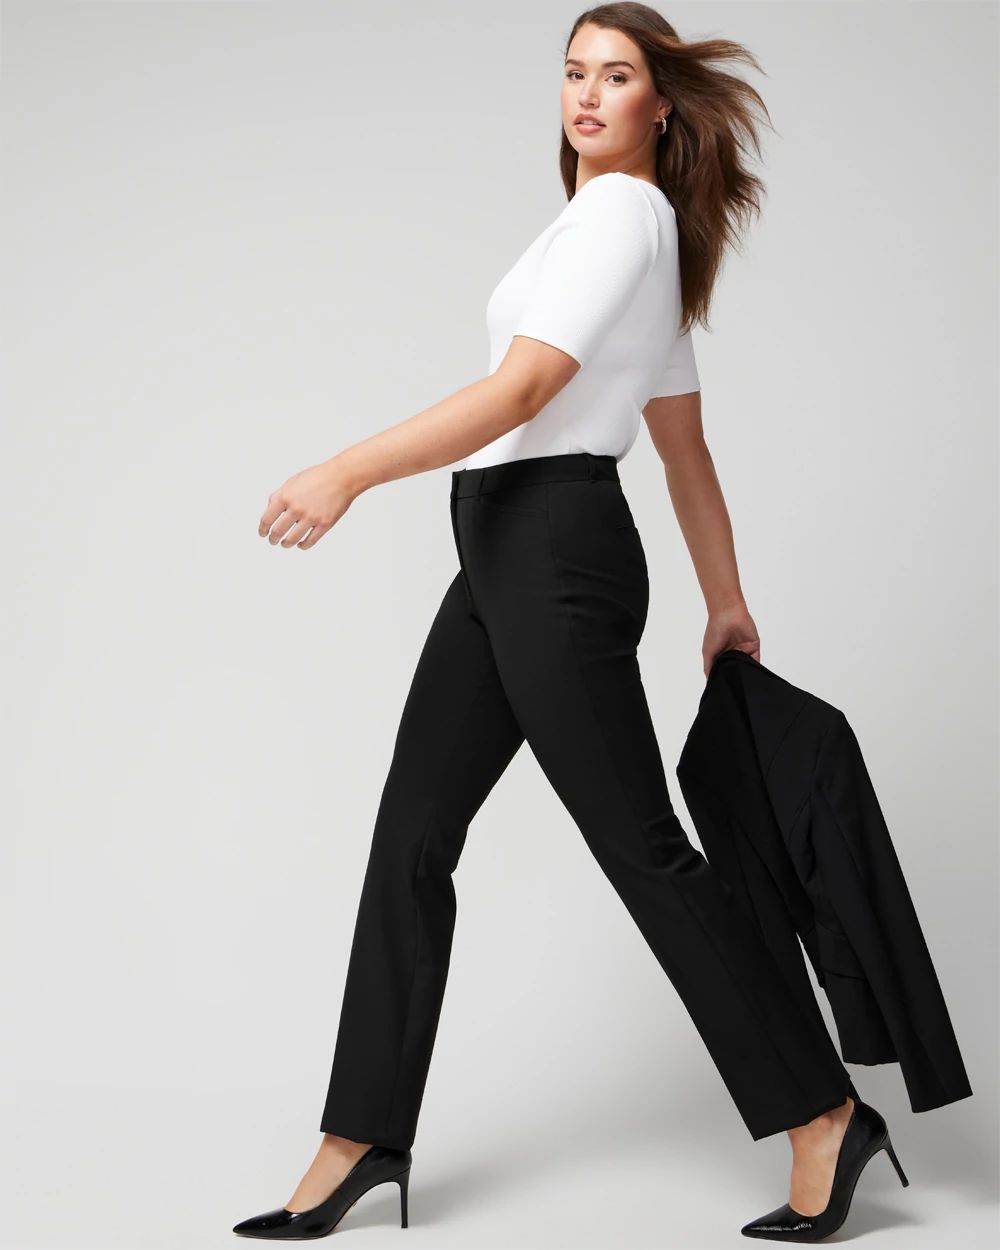 WHBM® Curvy Ines Slim Bootcut Comfort Stretch Pant click to view larger image.